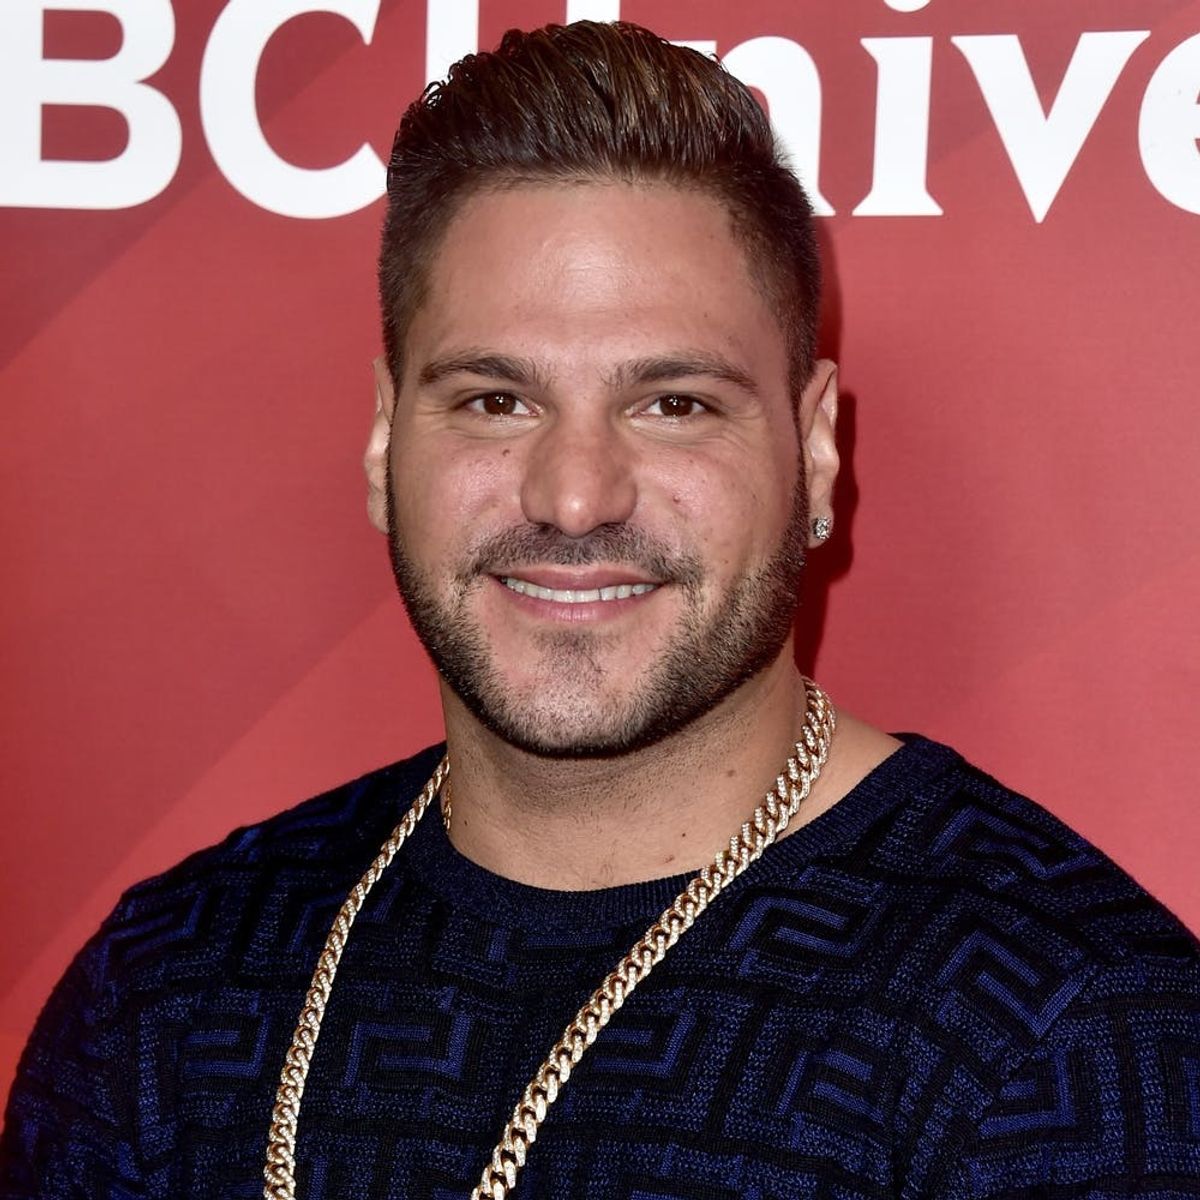 ‘Jersey Shore’ Star Ronnie Ortiz-Magro Just Revealed His Baby Daughter’s Name